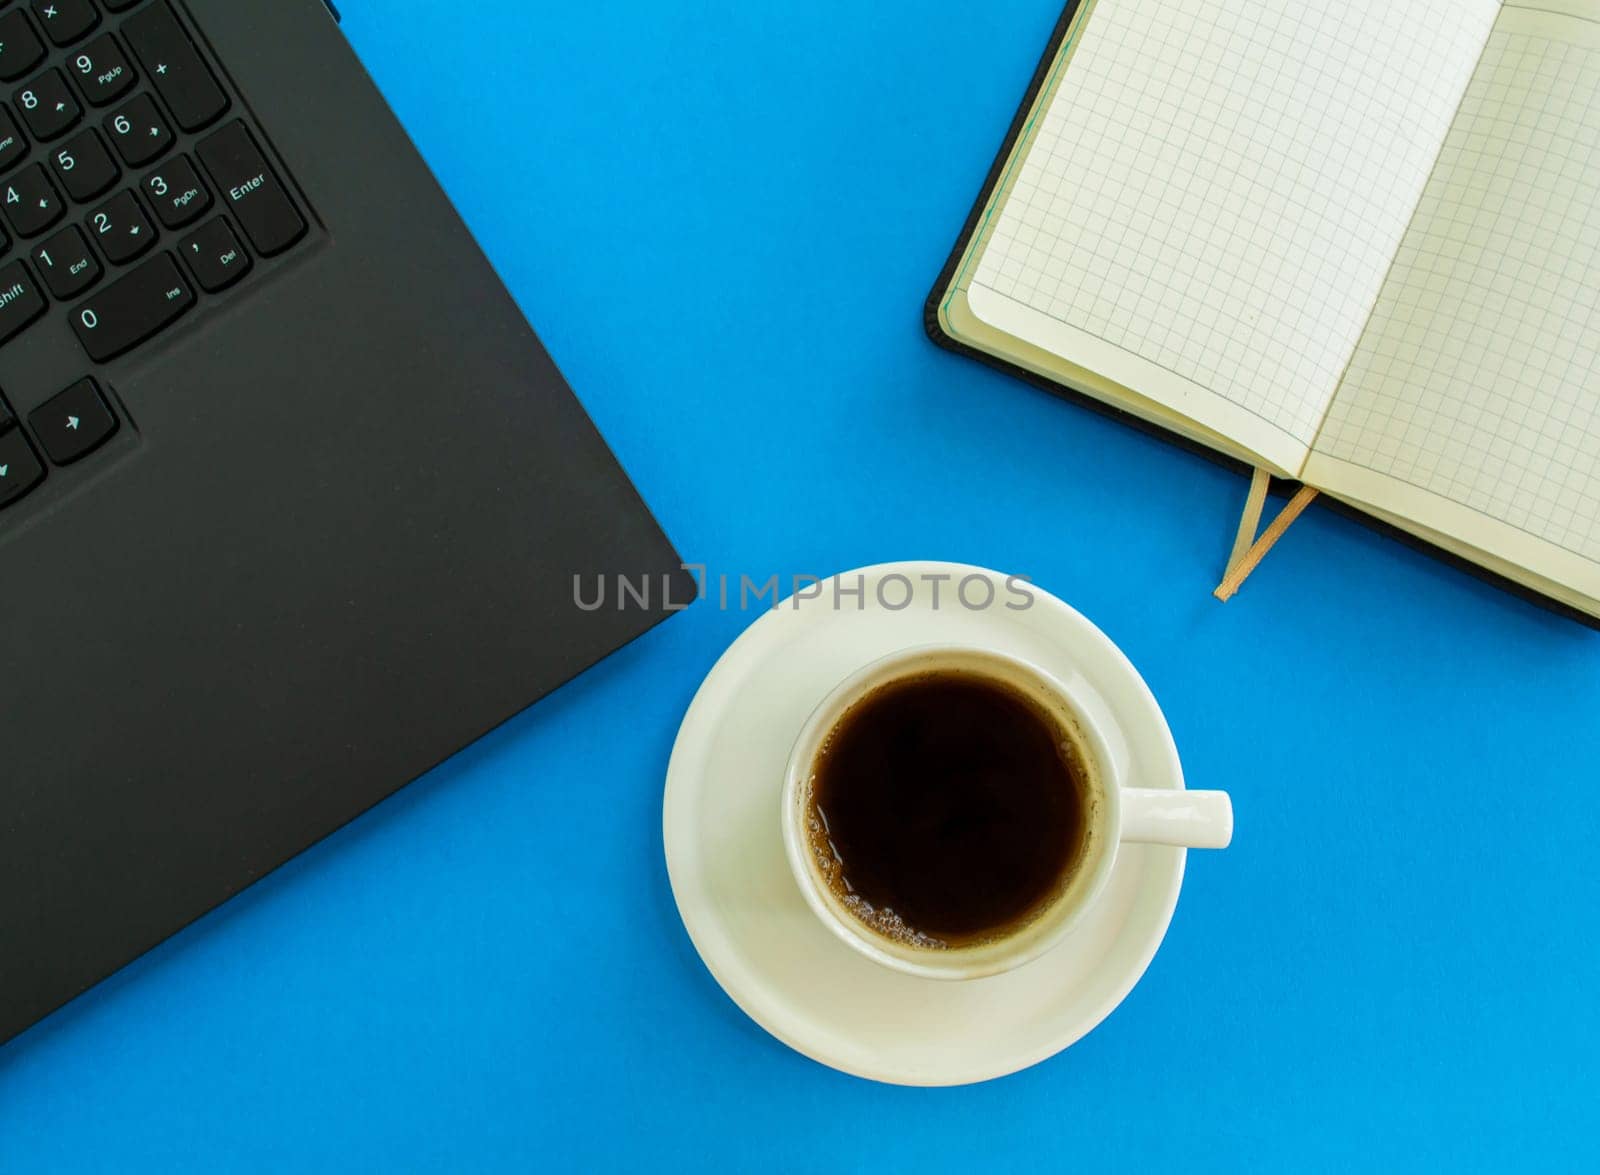 Desktop. Laptop, notepad, coffee cup. Mockup diary. Business, freelancing, back to school.